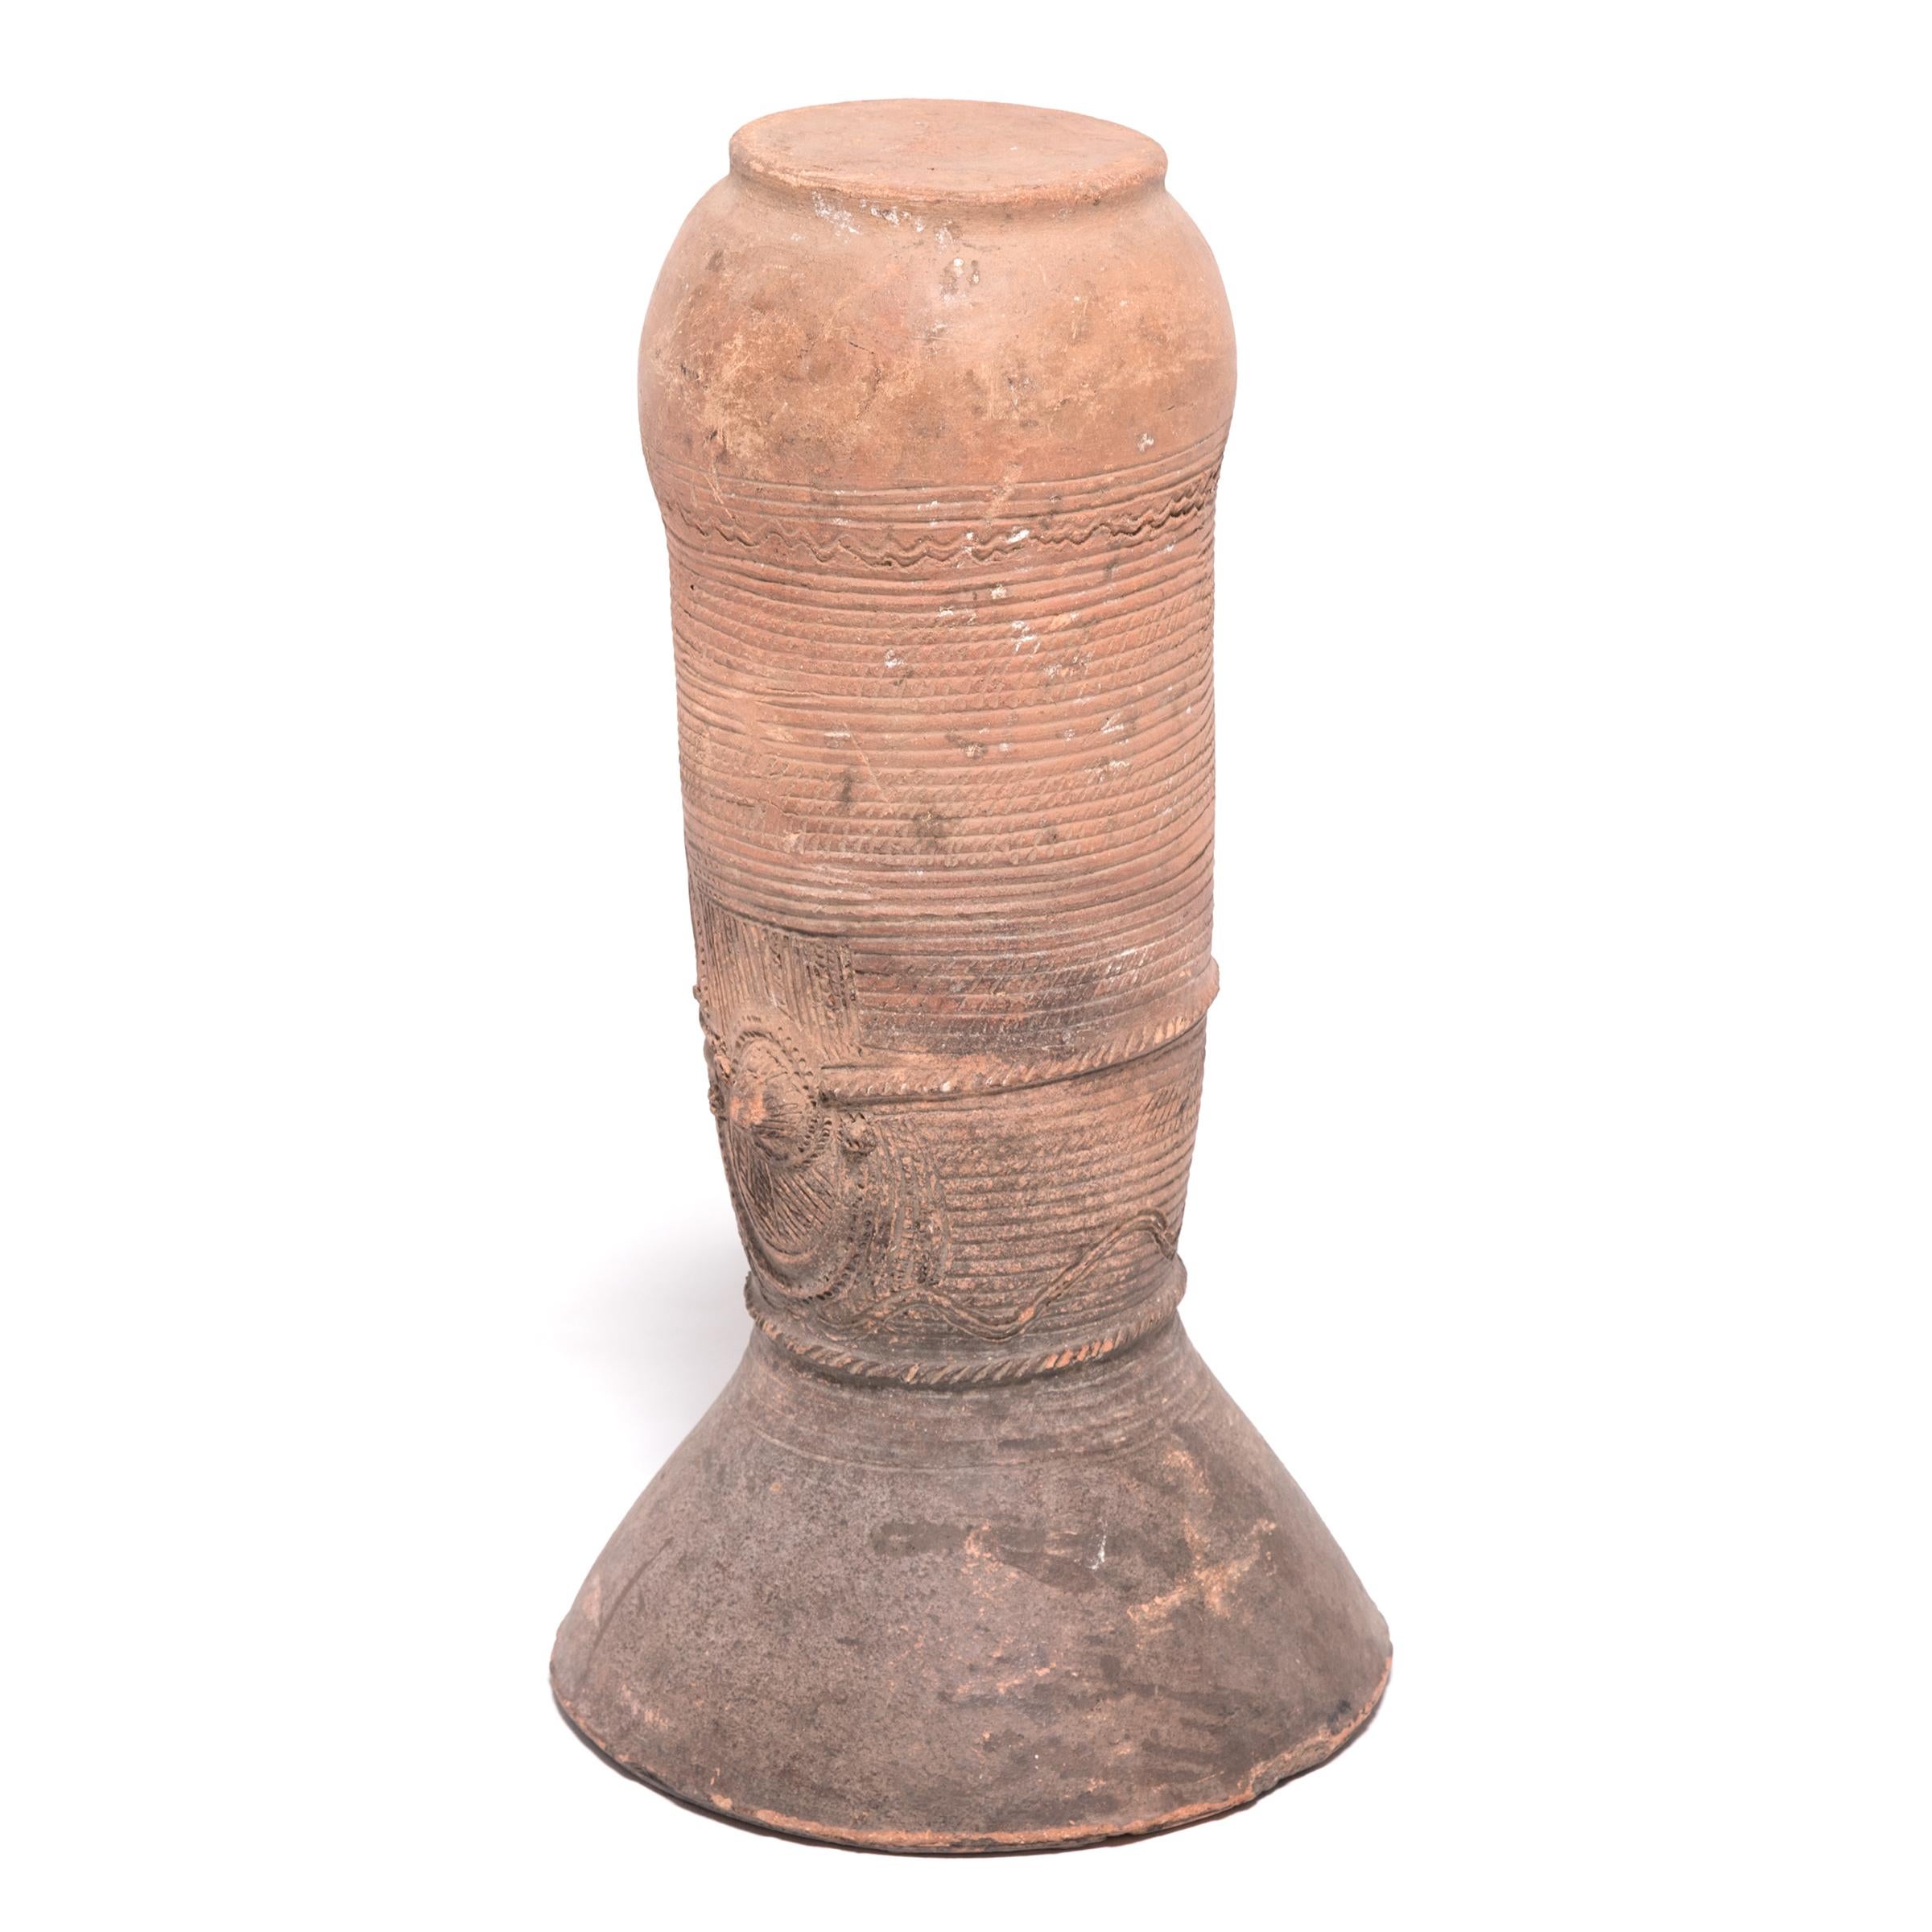 The Nupe people of Nigeria were touted as some of the finest ceramicists in Africa. Everyday objects, like this elegant, cylindrical vessel support, received detailed attention. This flaring terra cotta form would have been buried halfway in the